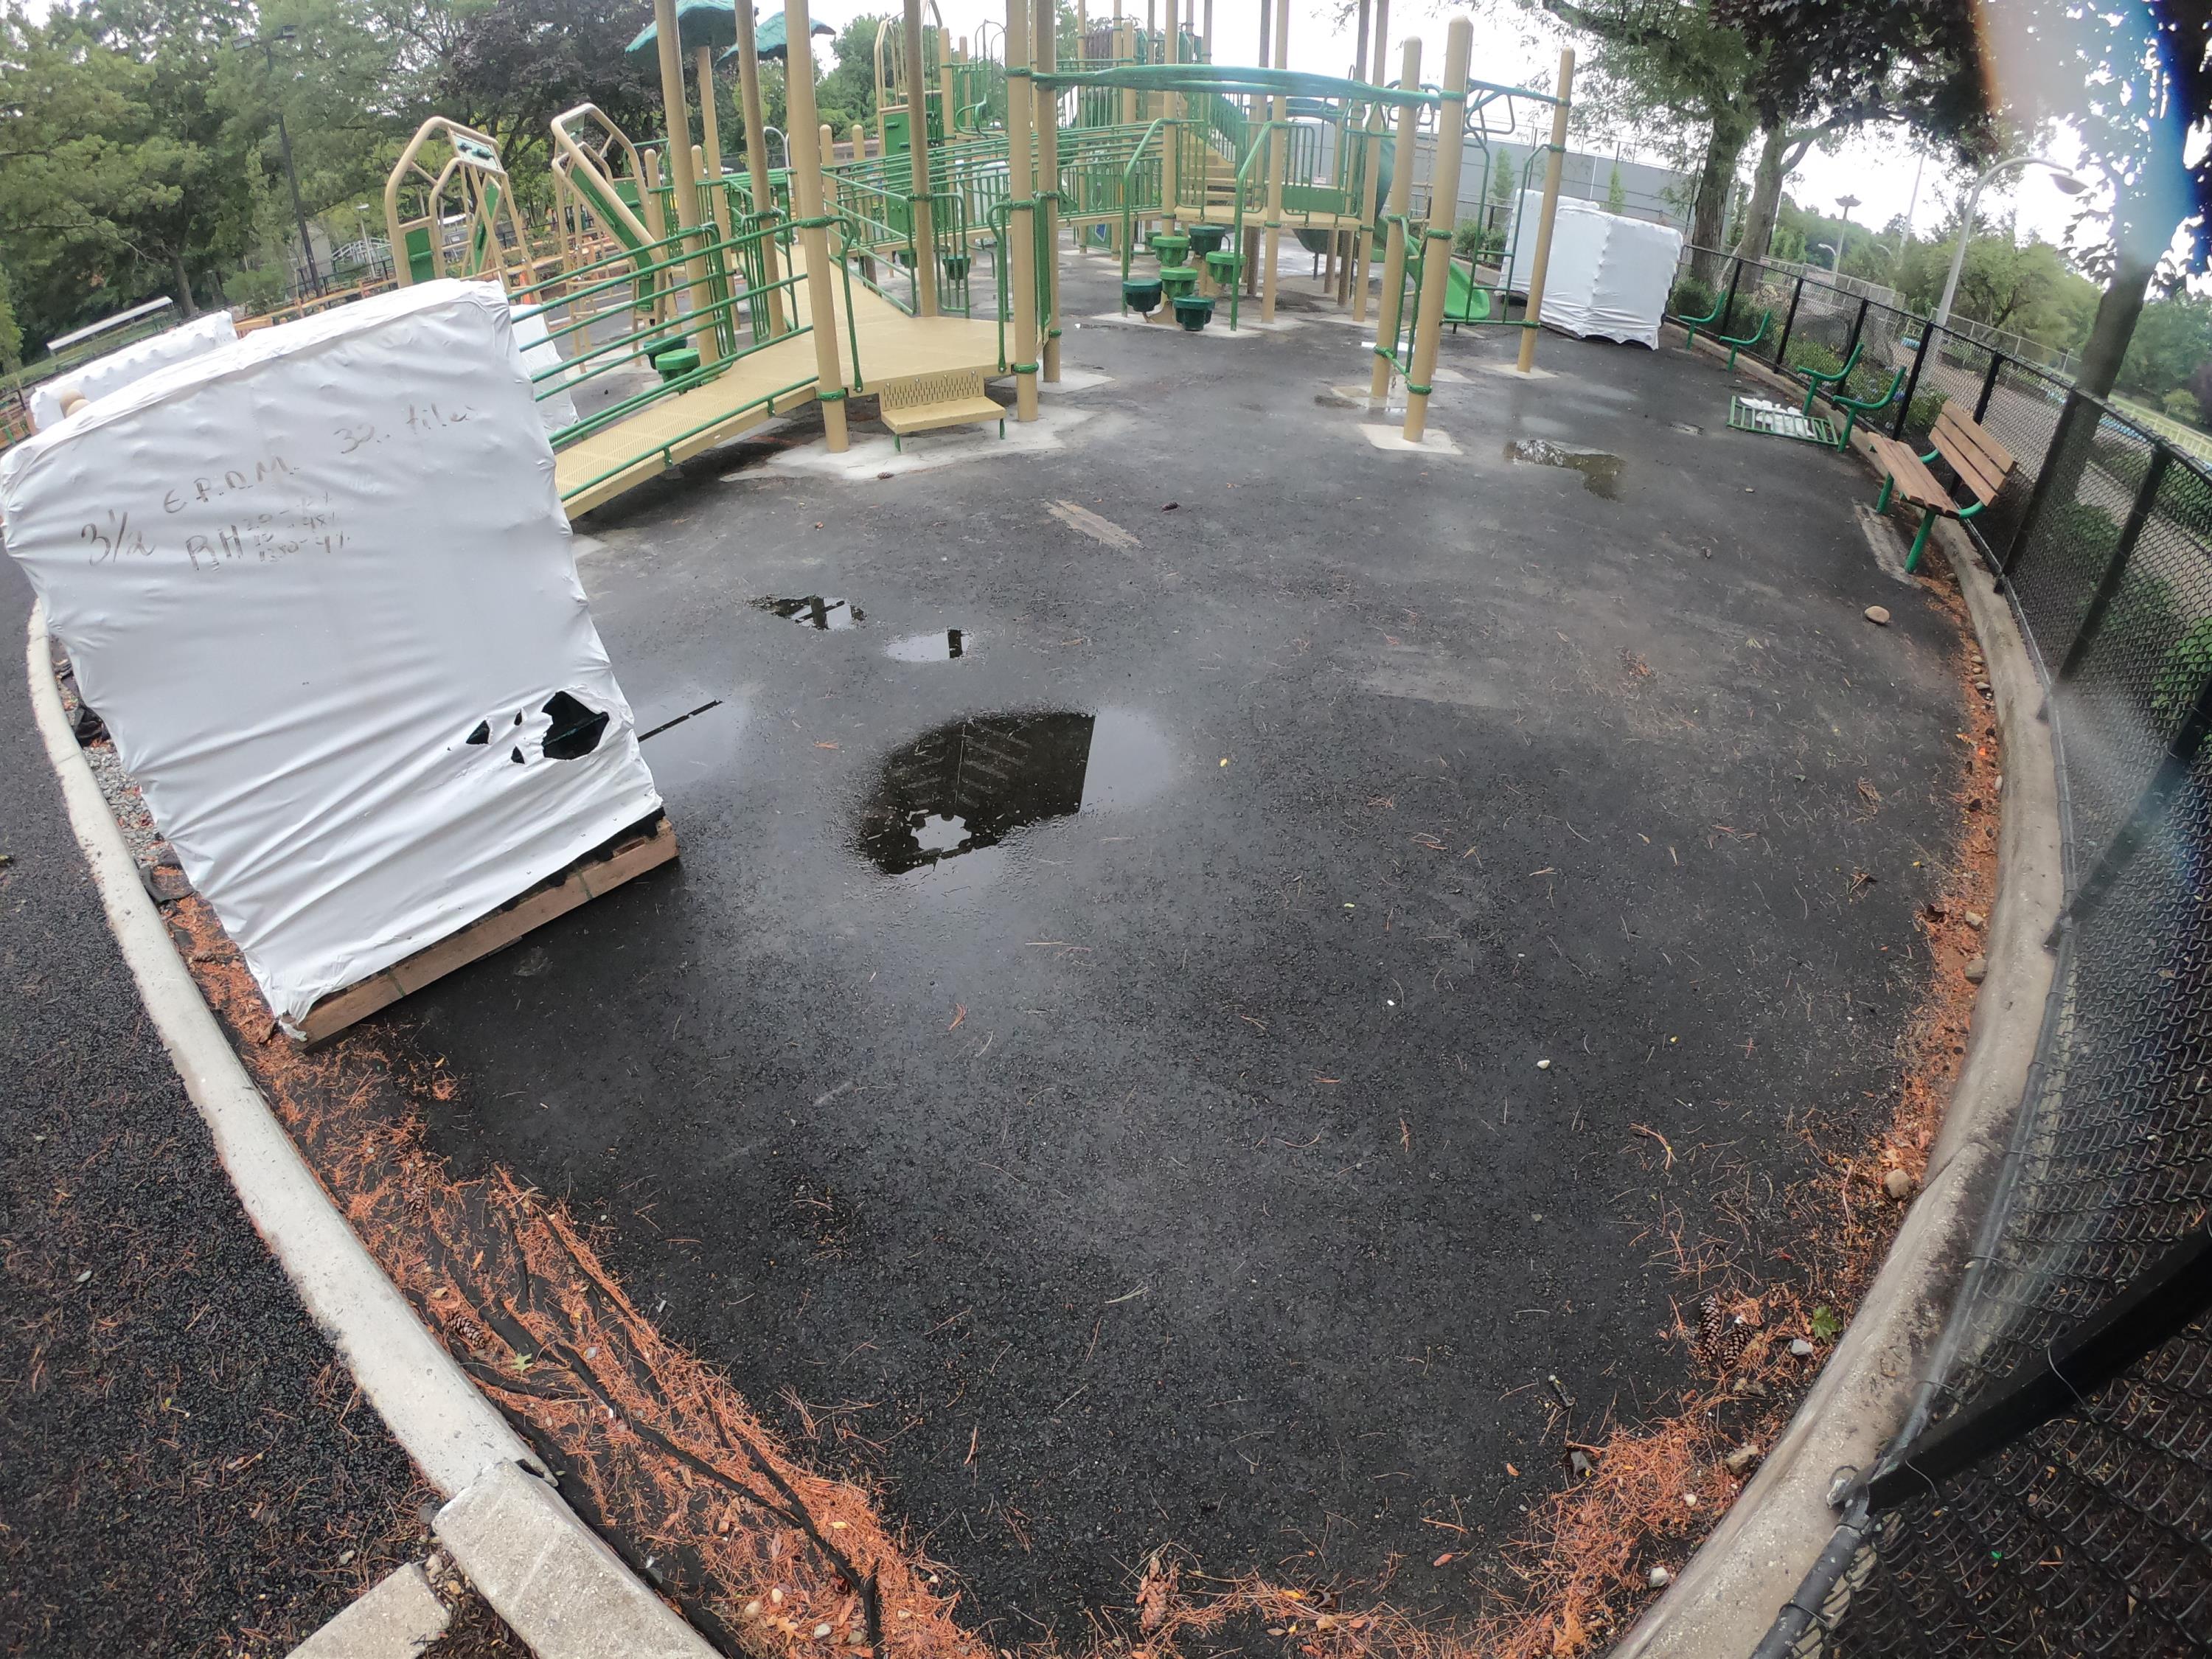 County Park Playground = Using TPV Top Tiles w50% Blue 45% Green 5% Black c